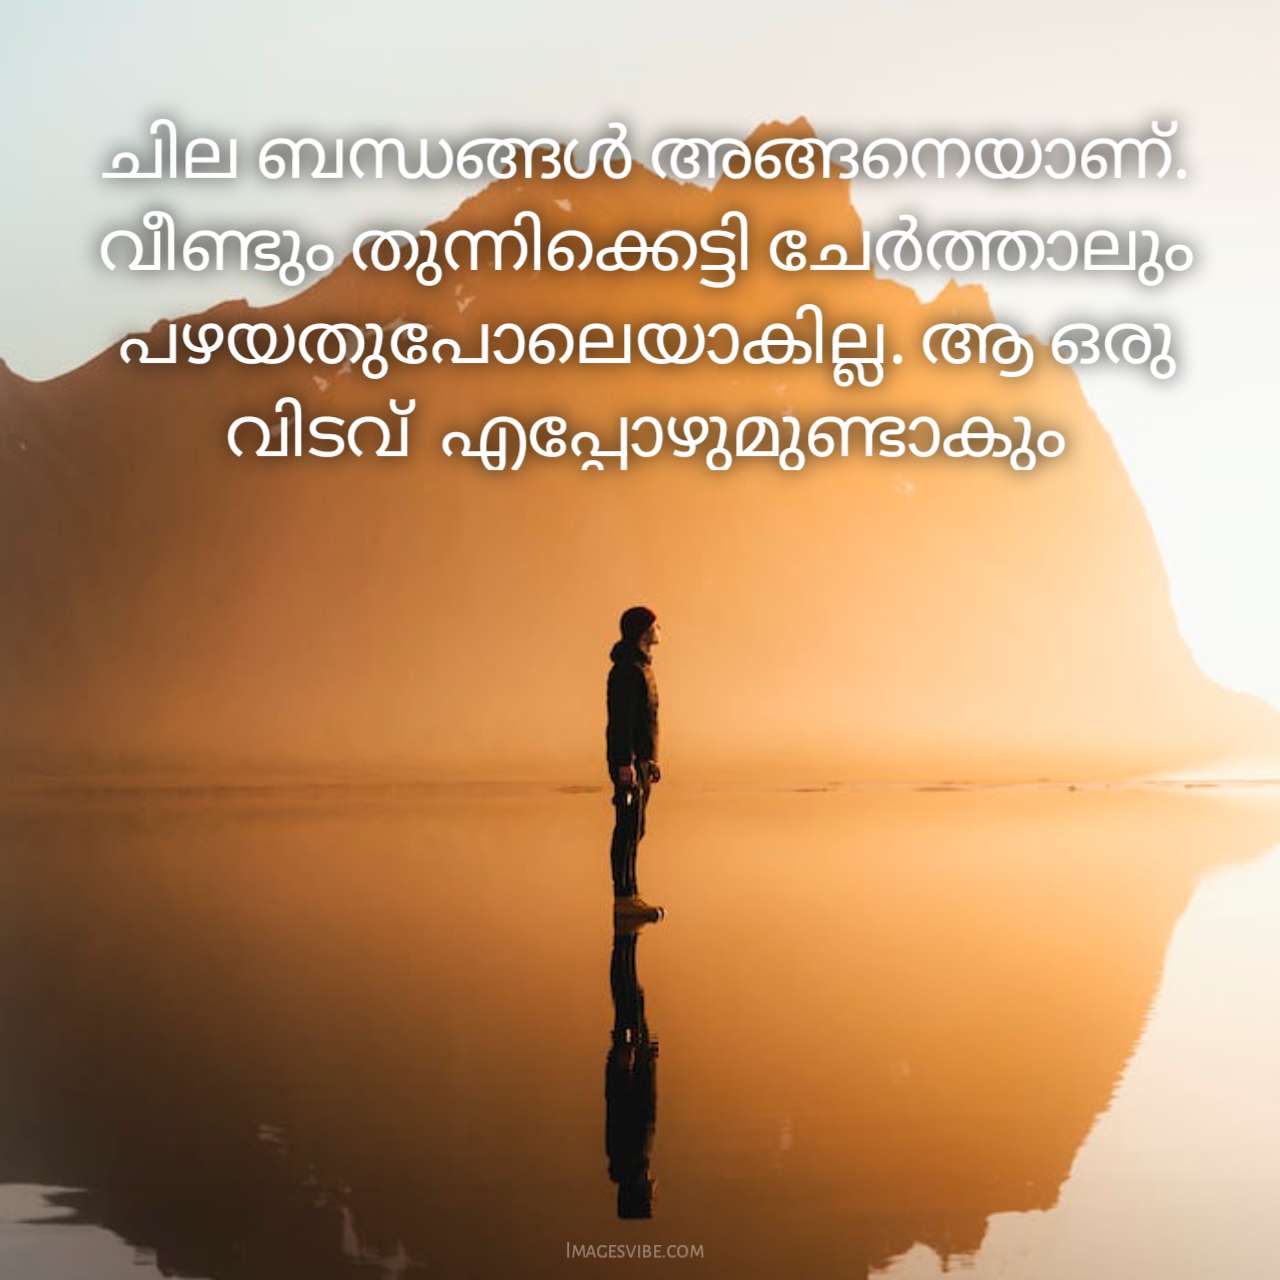 Best 50+ Feeling Malayalam Quotes & Images - Images Vibe